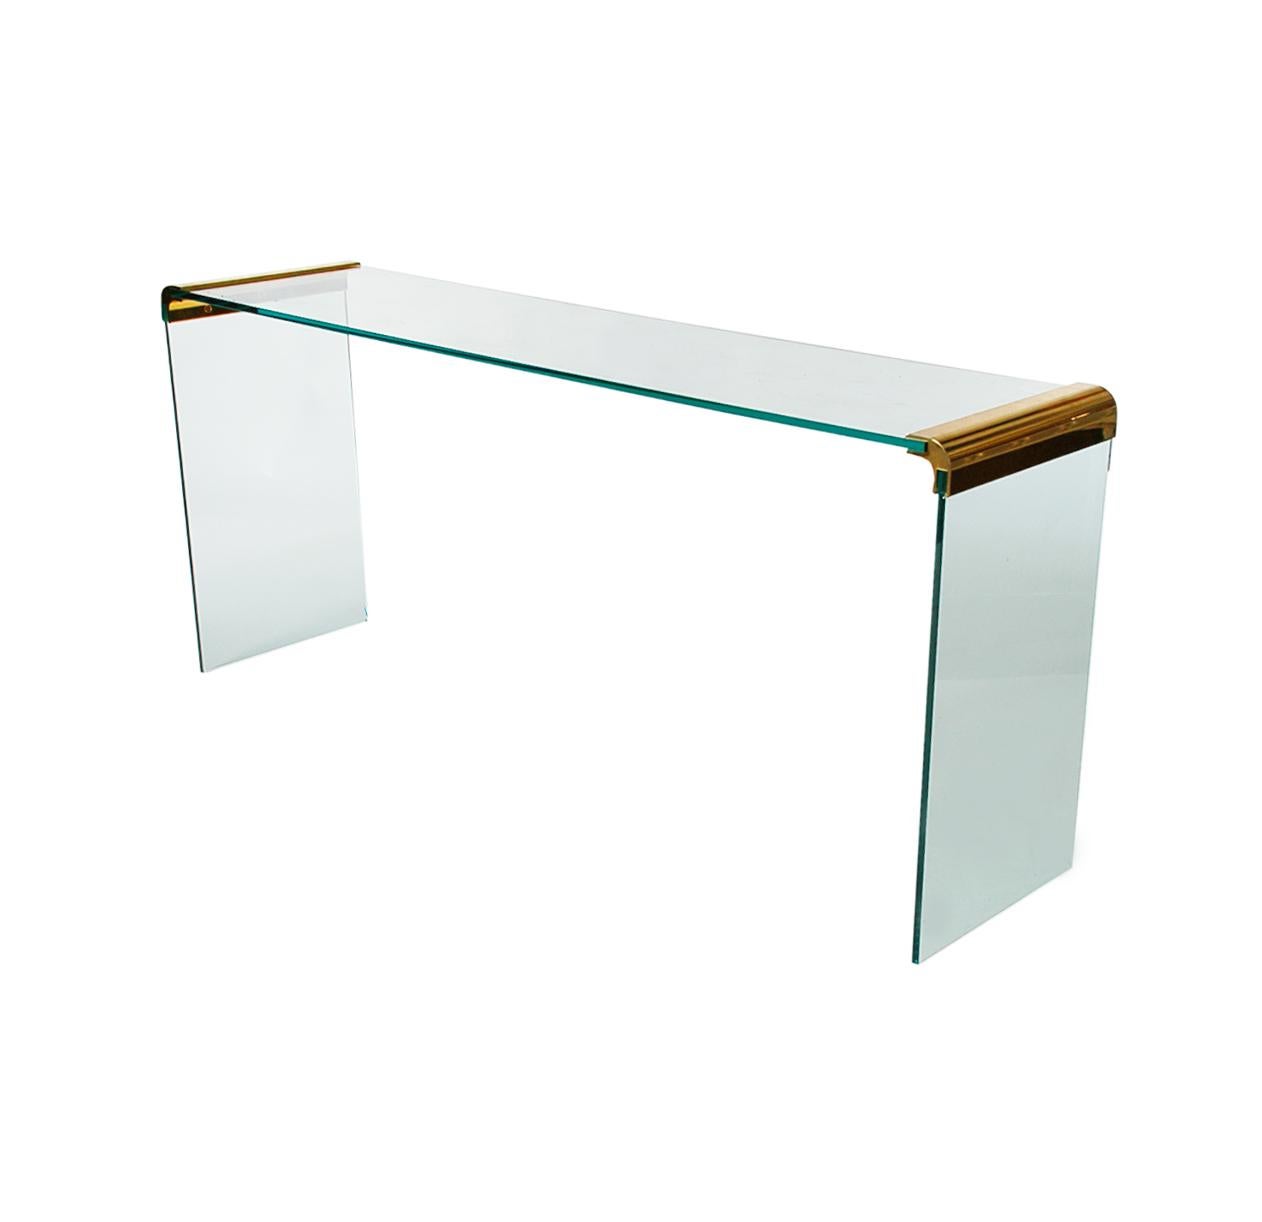 Mid-20th Century Mid-Century Modern Brass and Glass Console or Sofa Table by Leon Rosen for Pace